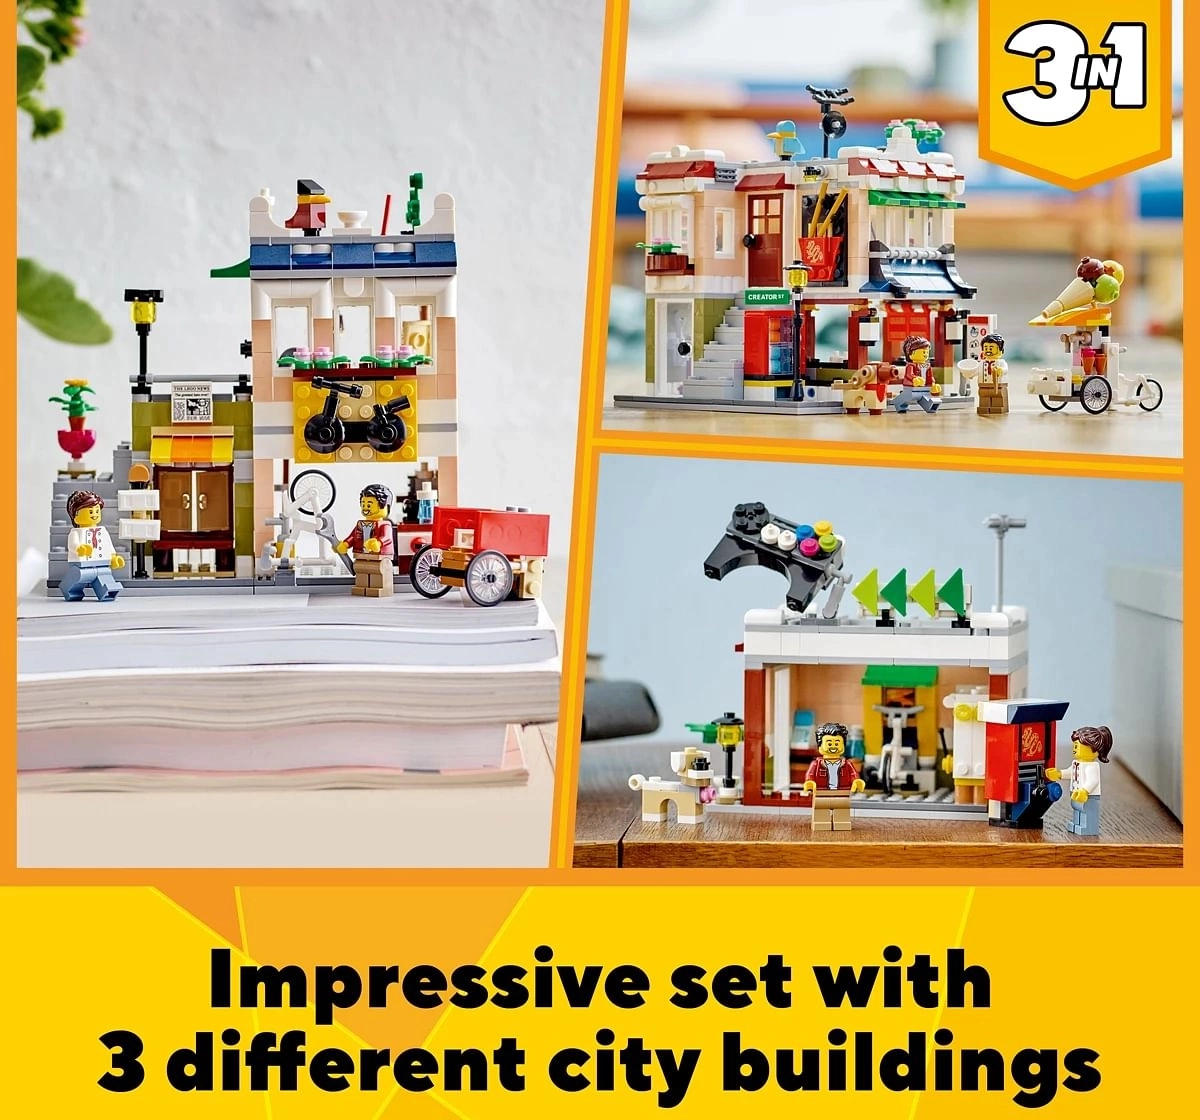 Lego Creator 3in1 Downtown Noodle Shop Building Toy Set for Boys, Girls and Kids Ages 8+  Features a Townhouse, Bike Shop or Arcade (569 Pieces)